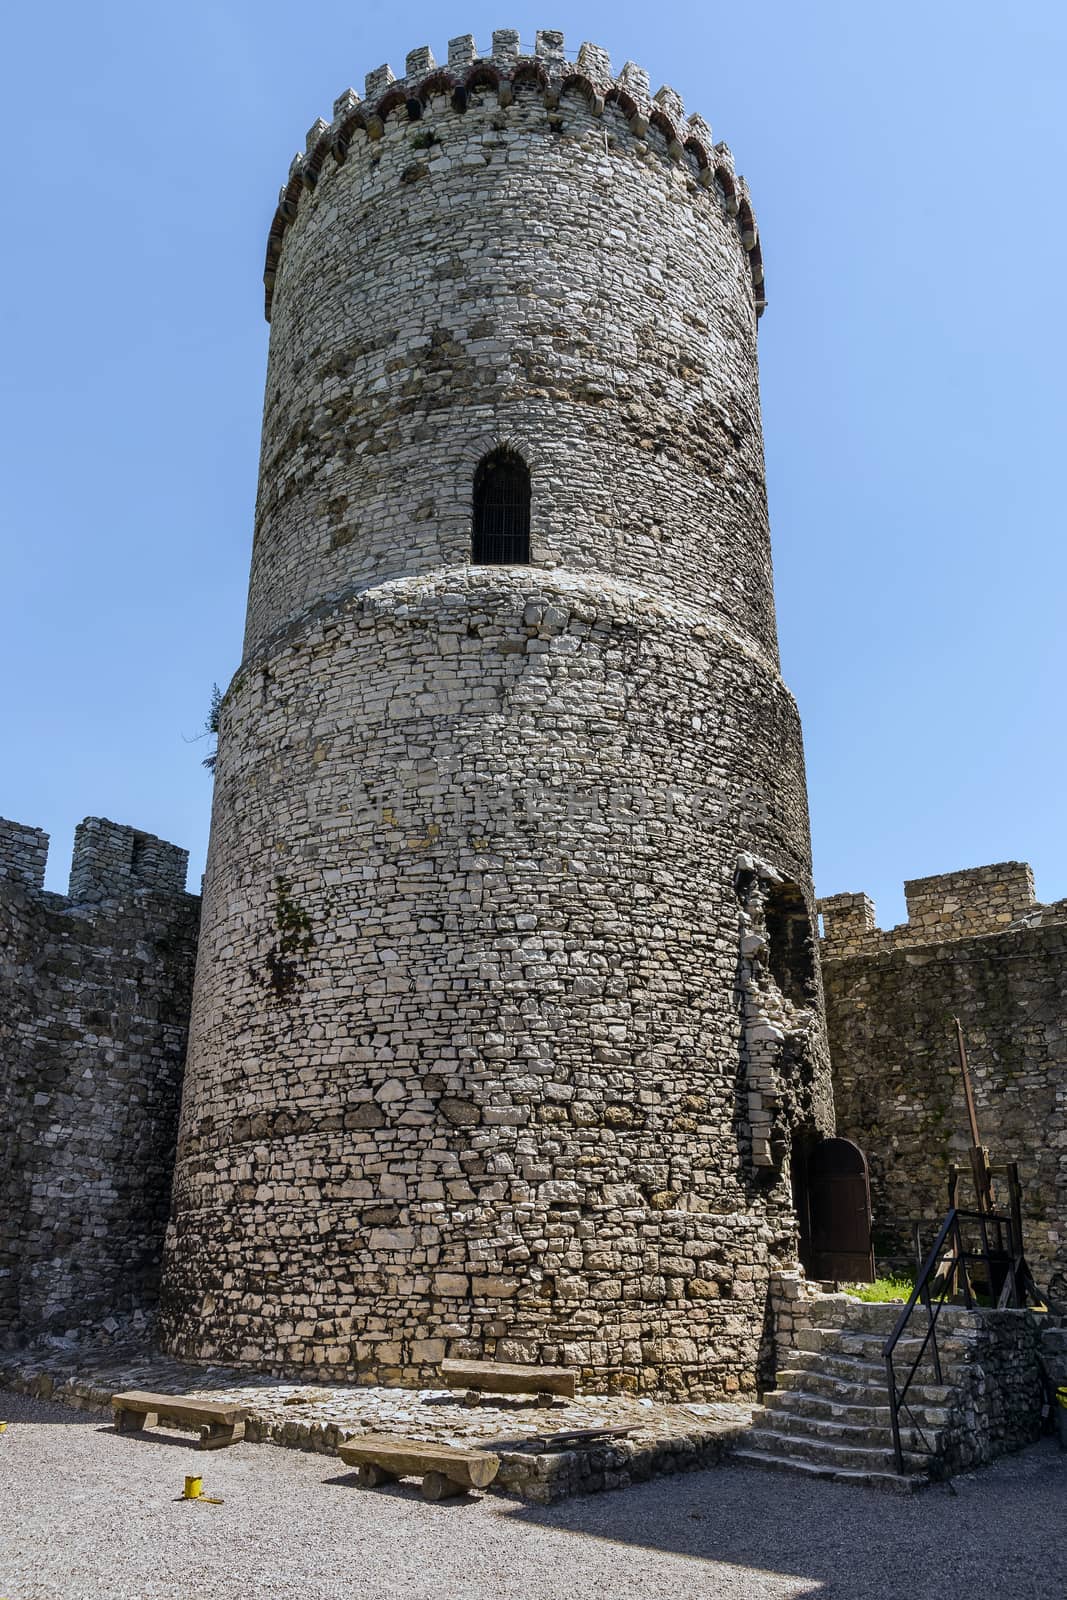 Tower of the Bedzin Castle, a medieval fortified stronghold built by King Casimir the Great in the forties of 14th century.